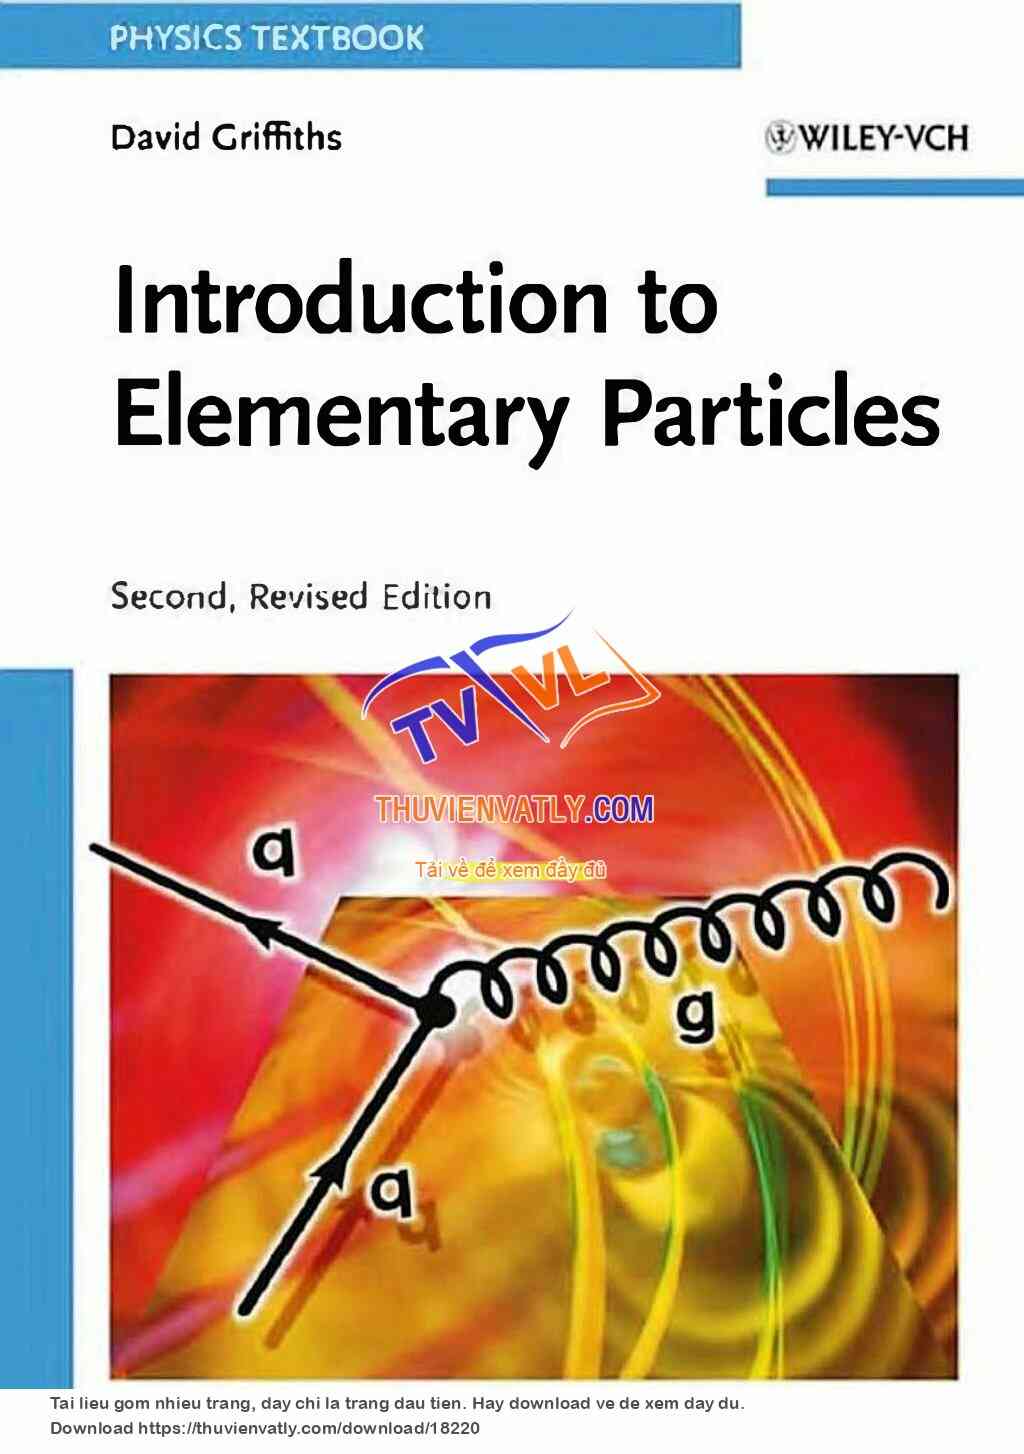 Introduction to Elementary Particles (Second, Revised Edition, David Griths, Wiley 2008)